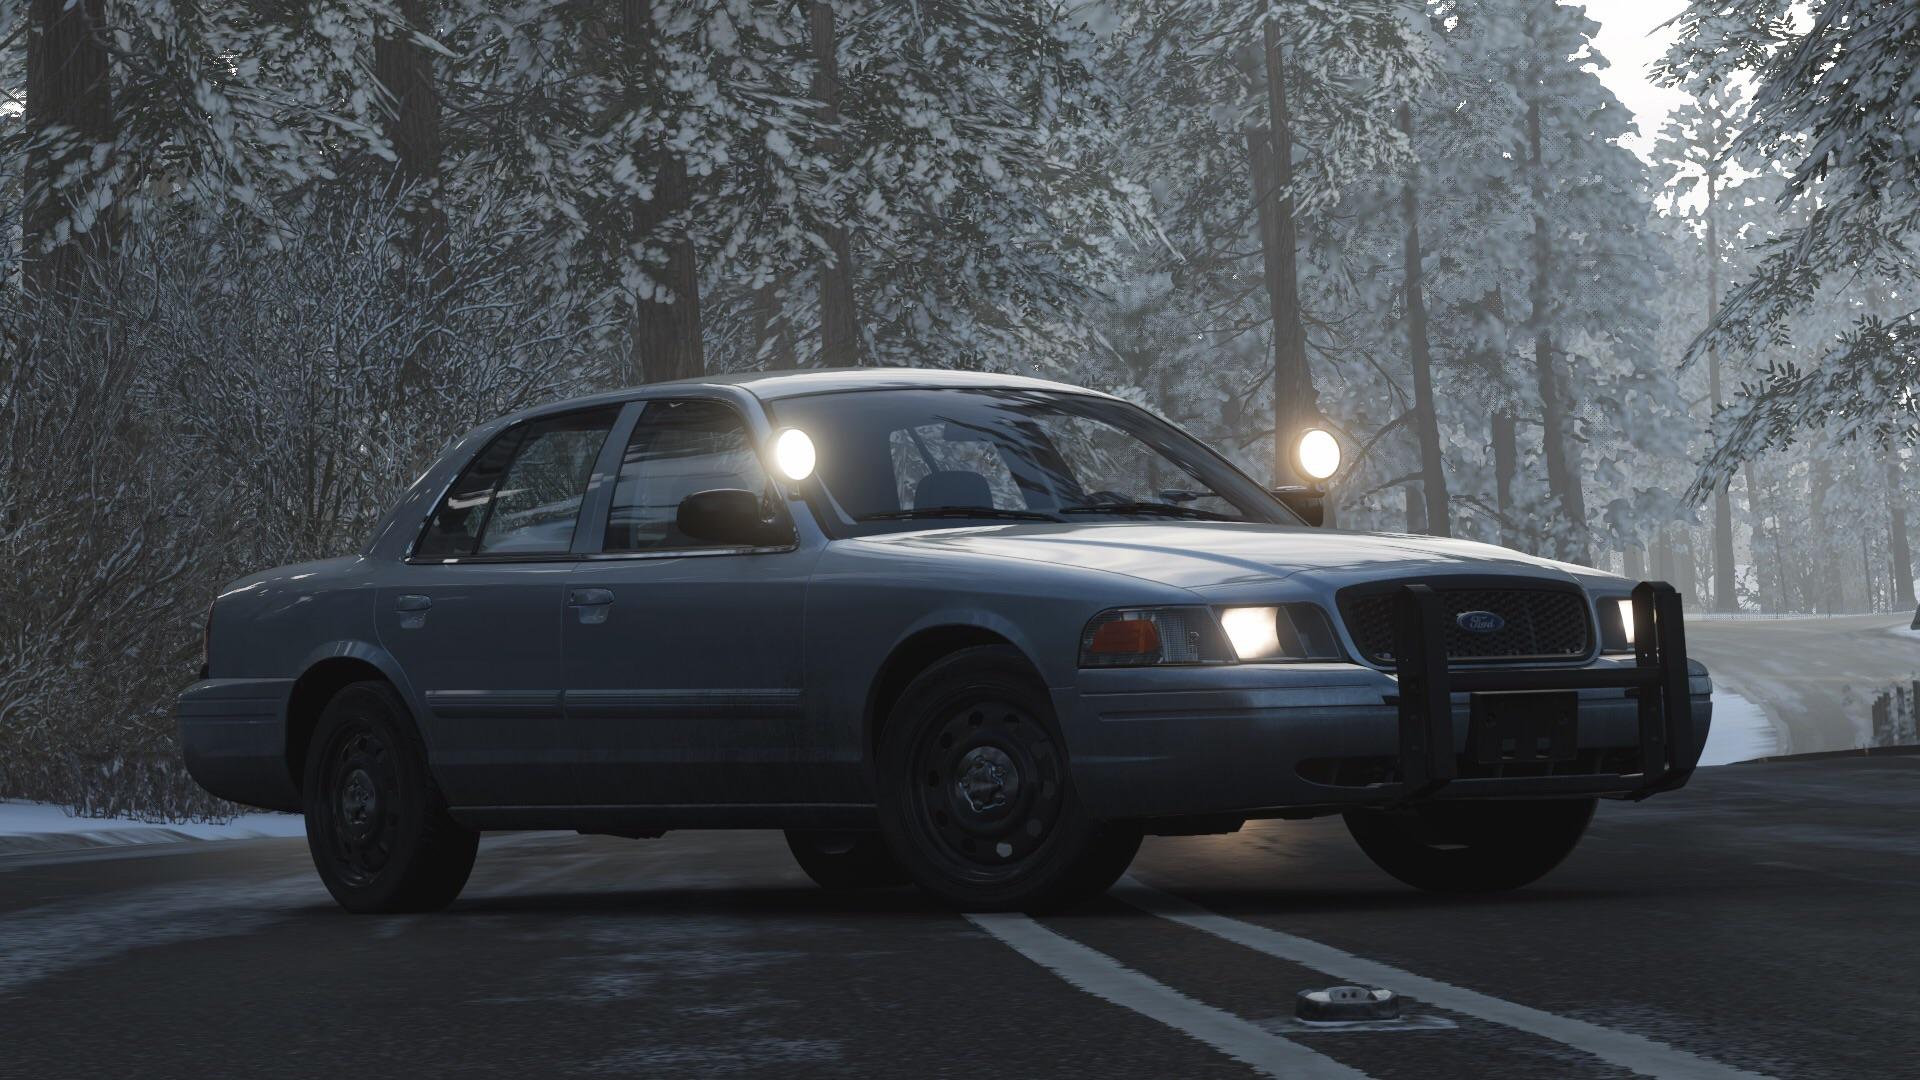 My Forza Horizon 4 Crown Victoria, this took forever to find!!